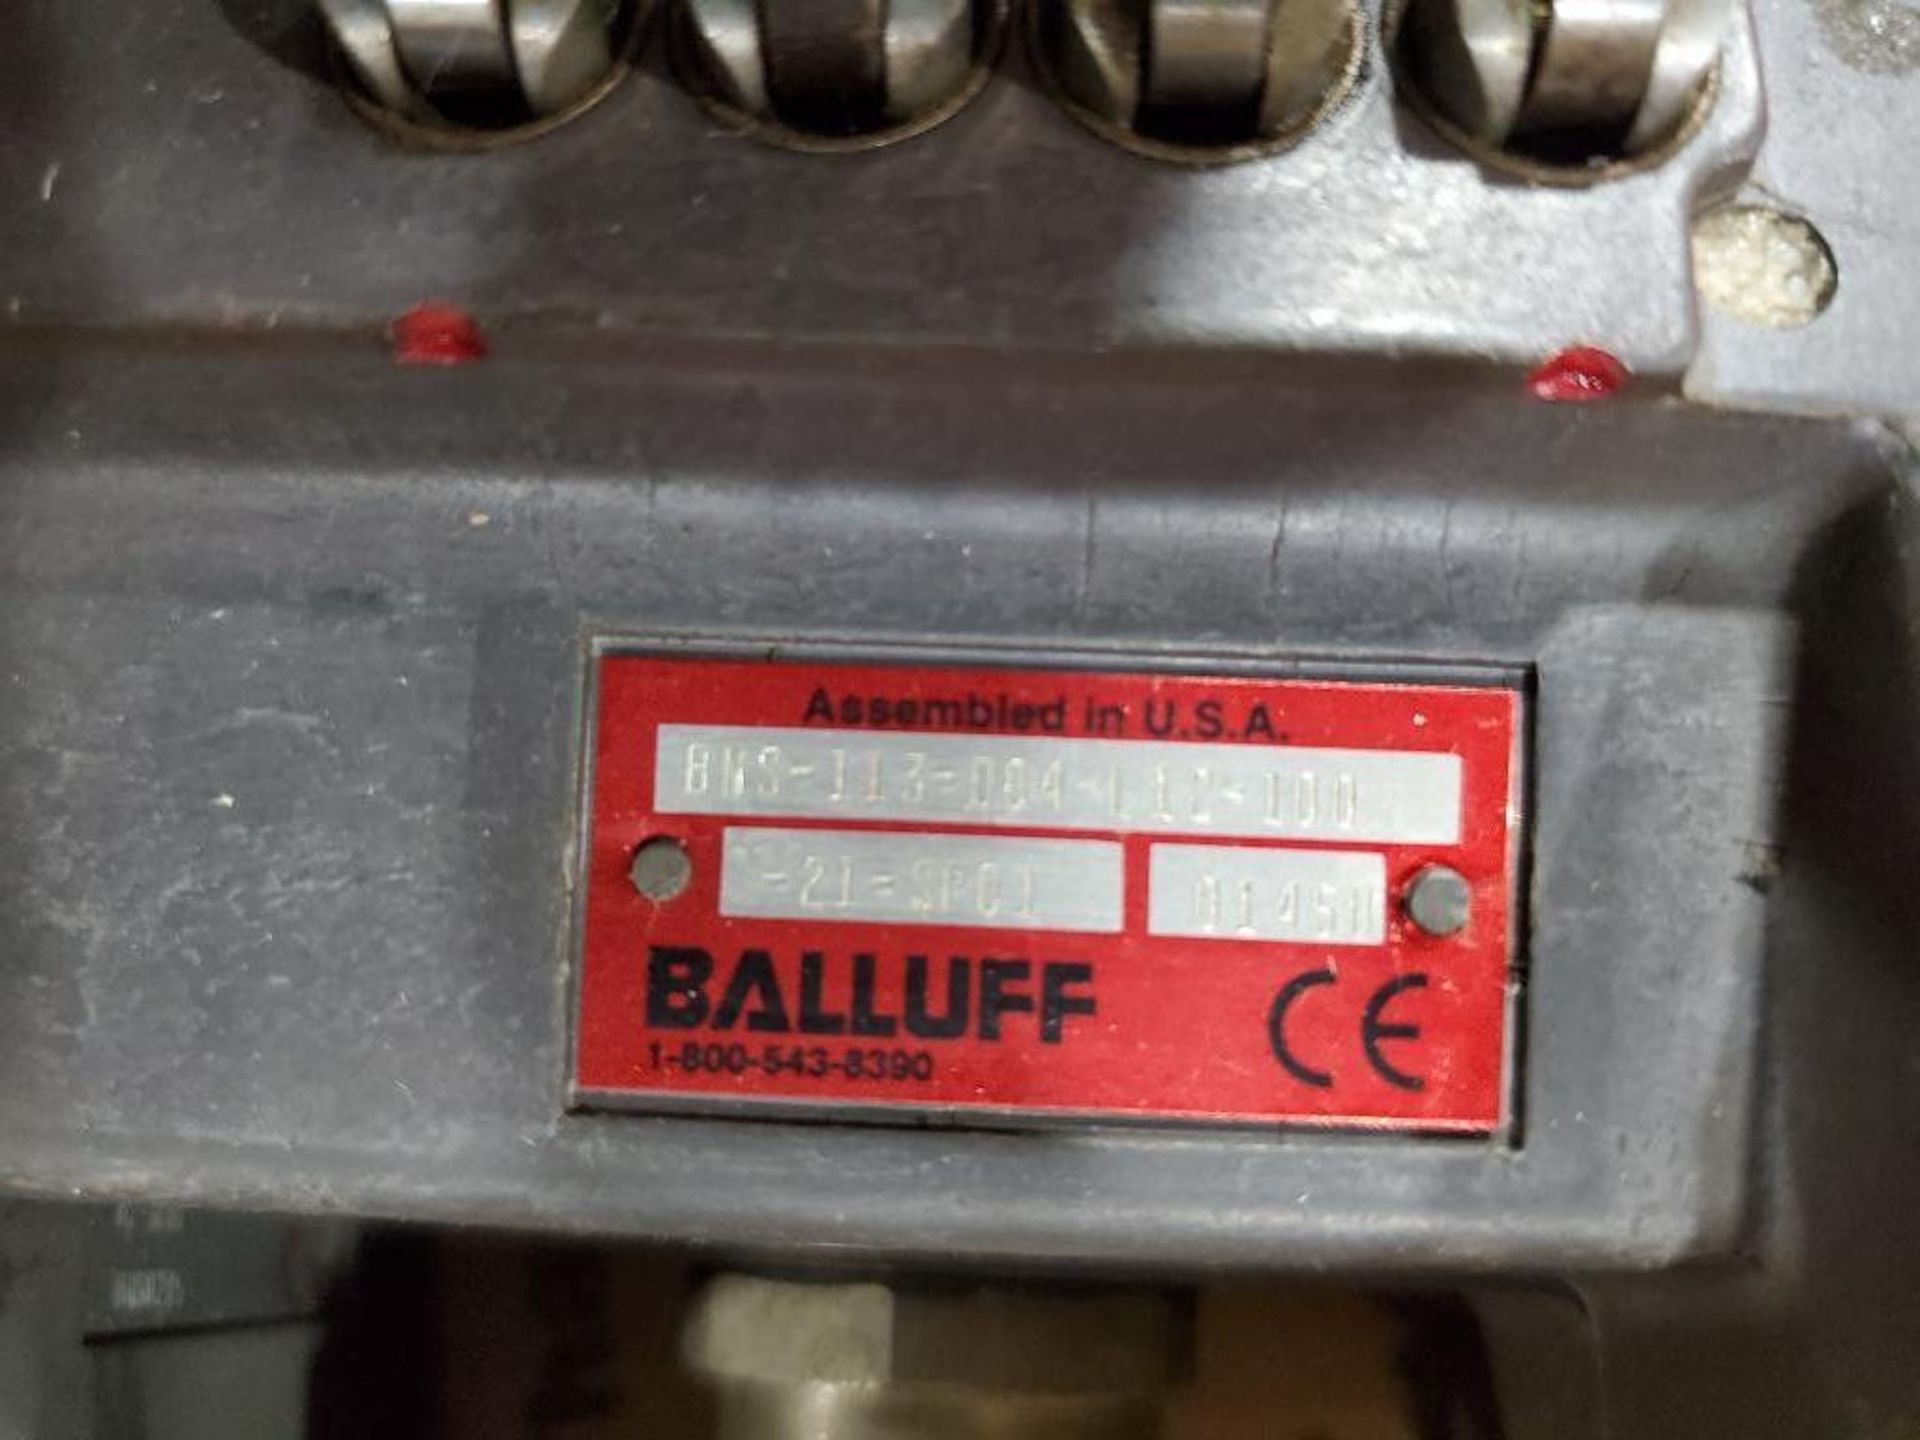 Qty 7 - Balluff switch. Part number BNS-113-004-L12-100. - Image 4 of 6